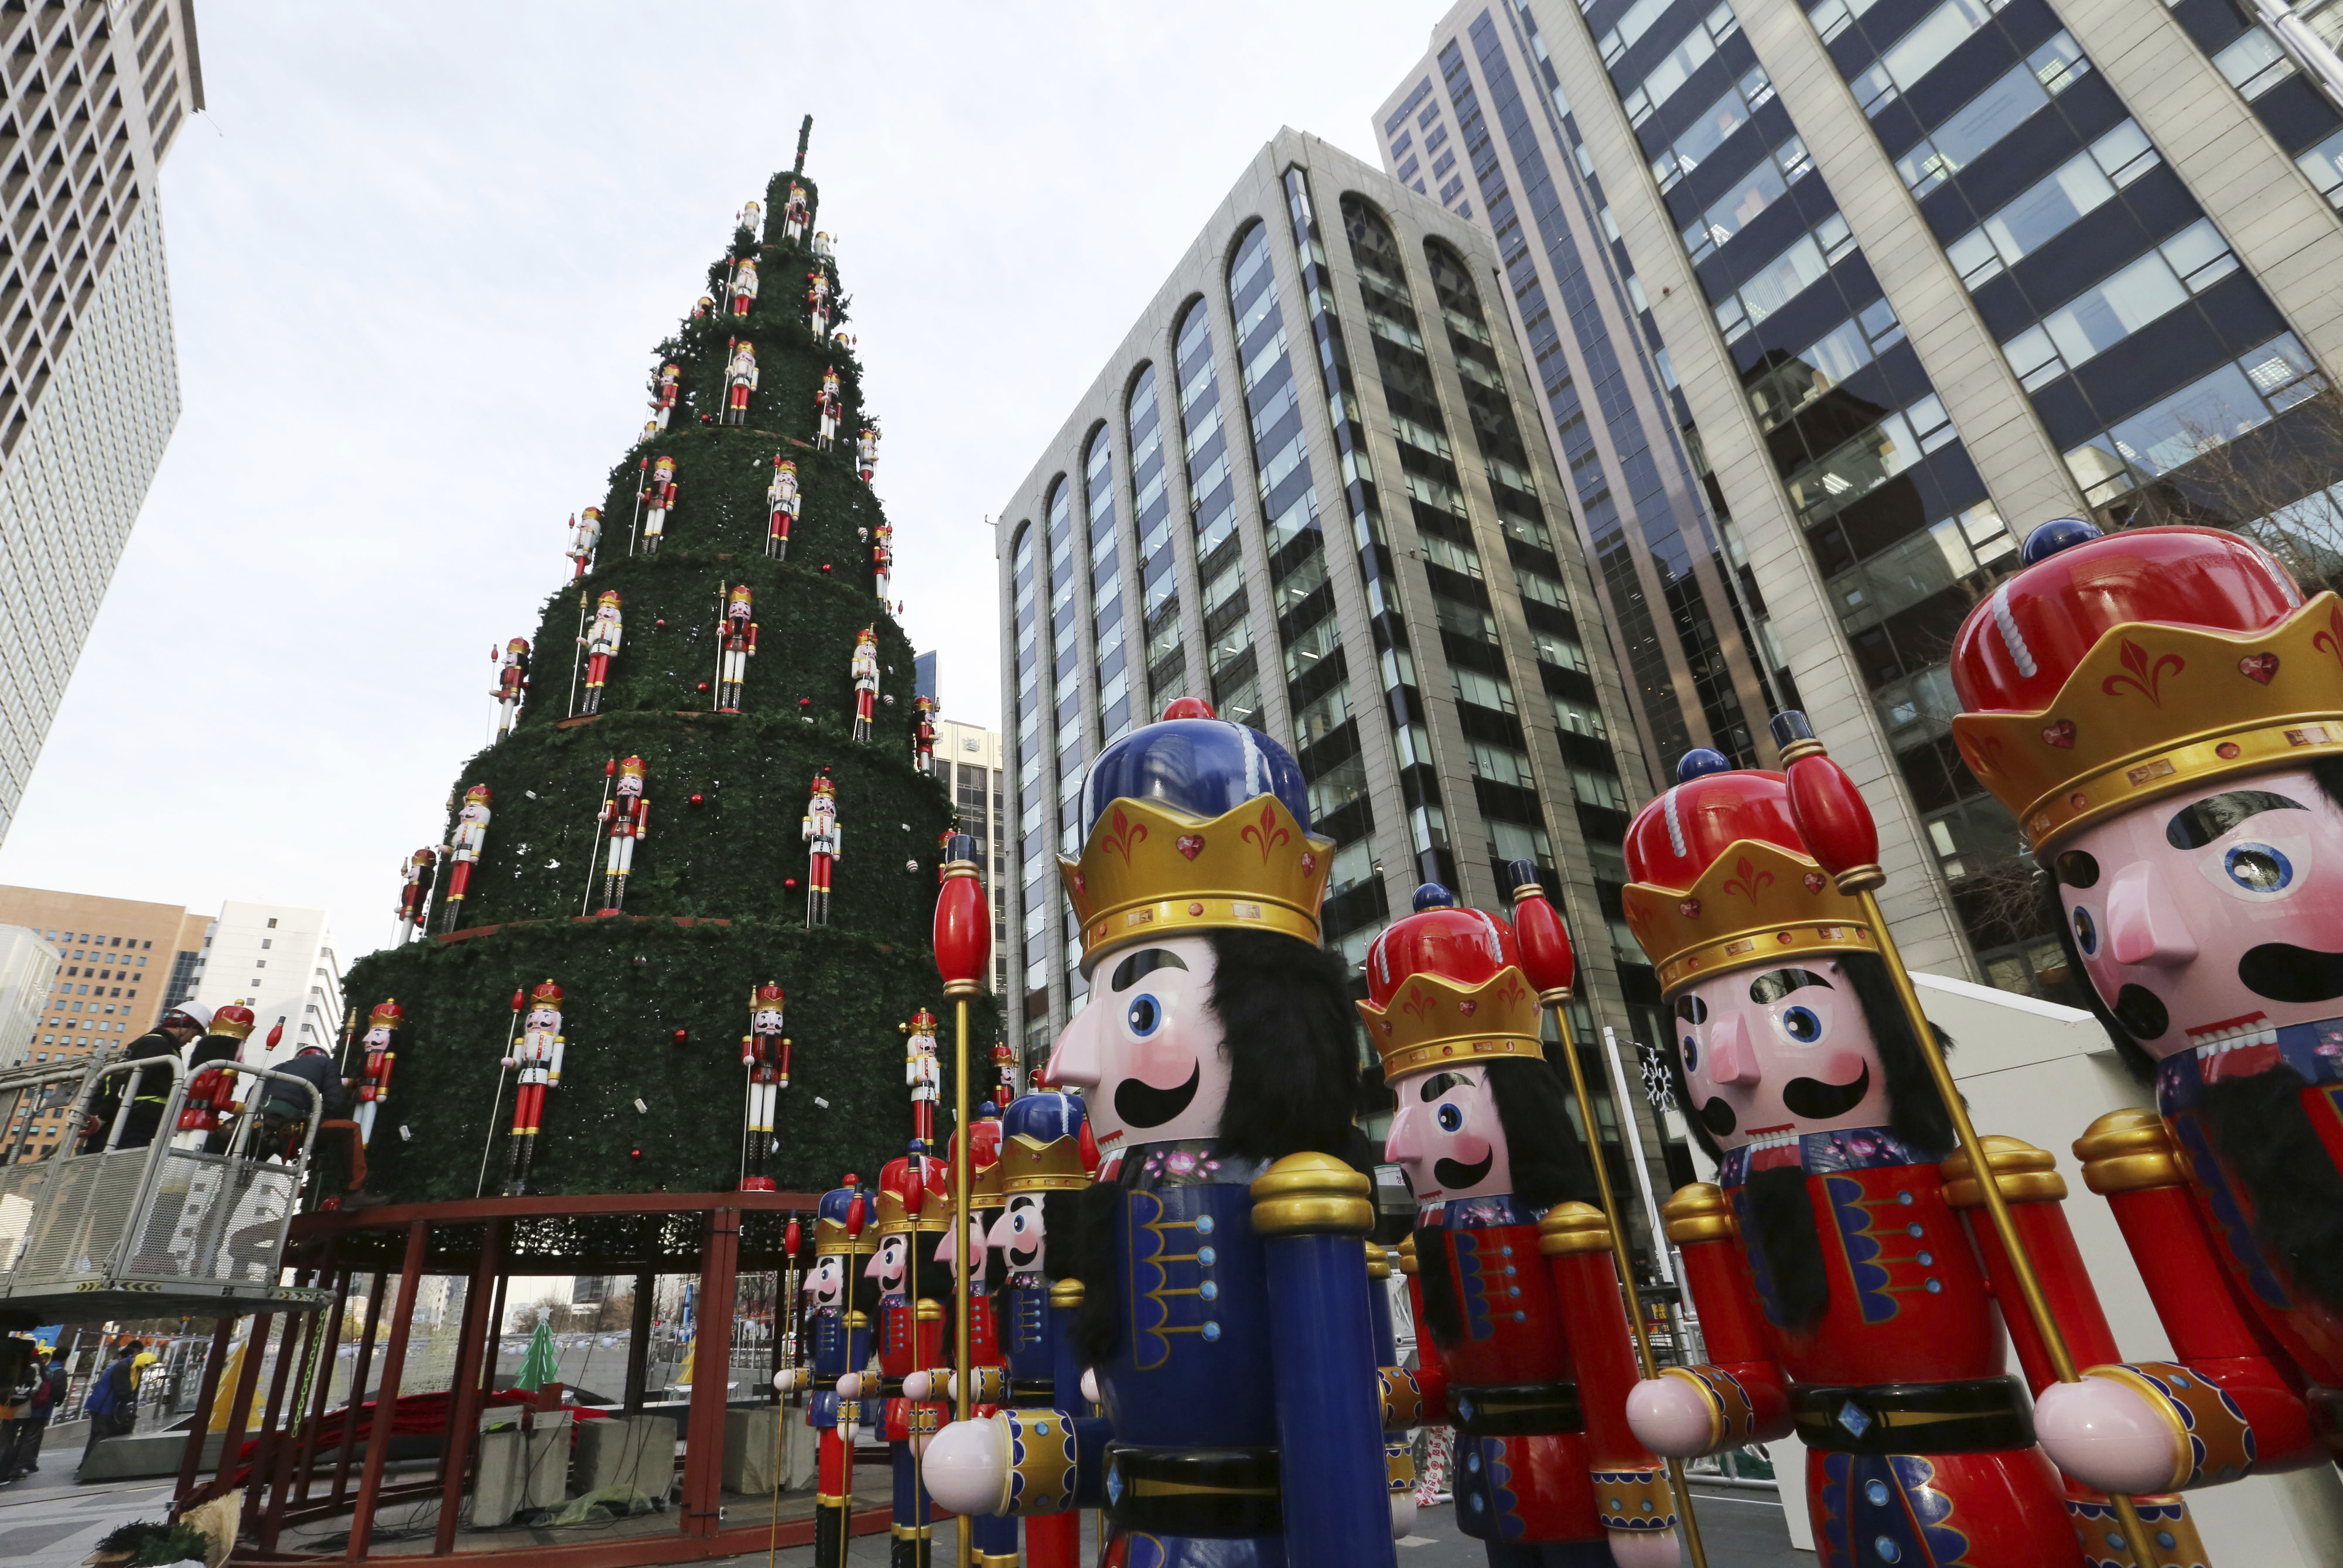 Workers adjust dolls to decorate a huge Christmas tree in Seoul, South Korea, Thursday, Dec. 6, 2018. Christmas is one of the biggest holidays celebrated in South Korea with some one third of the population being Christians.  (AP Photo/Ahn Young-joon)